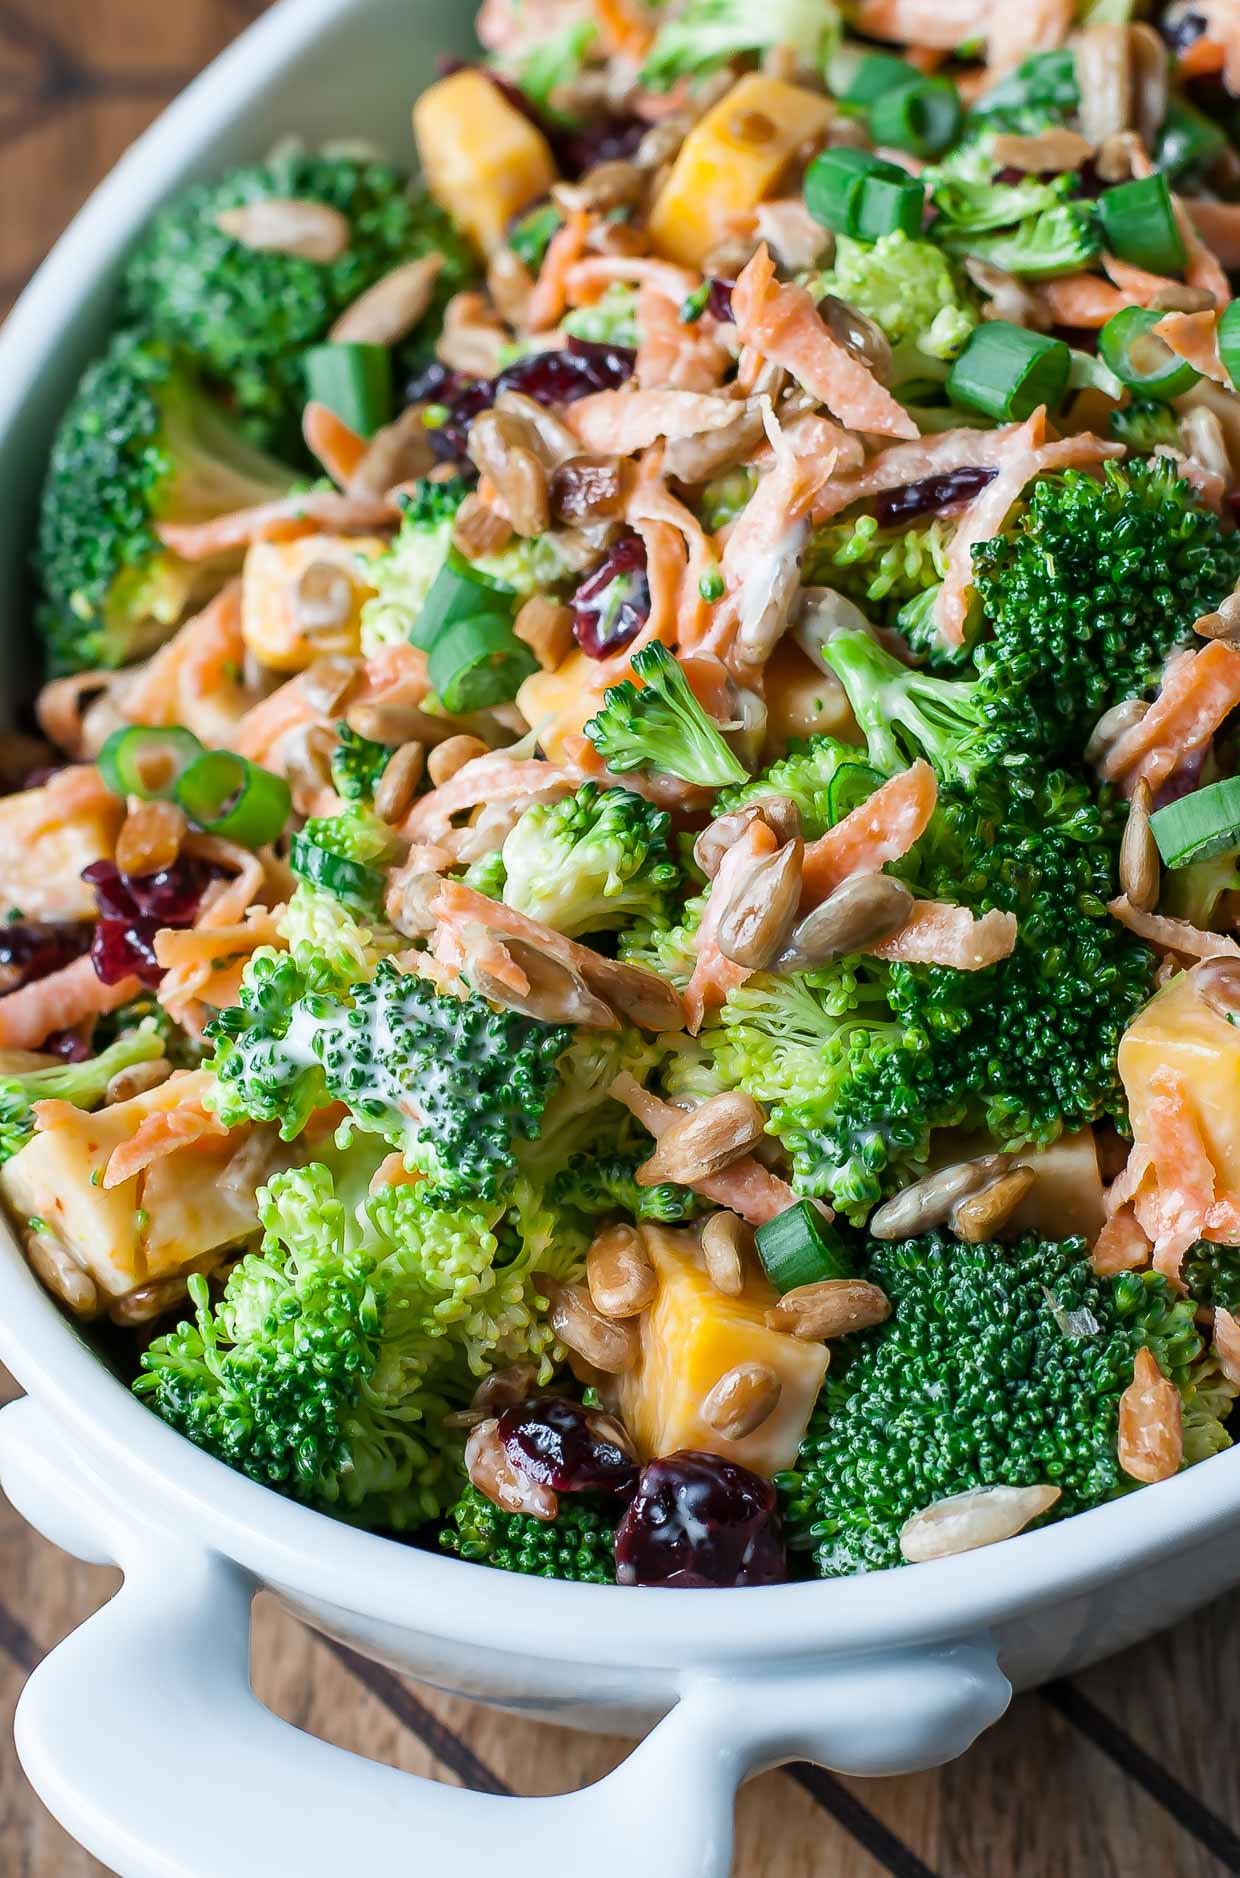 Classic Broccoli Salad with cranberries, carrots, and tasty lightened-up homemade dressing.